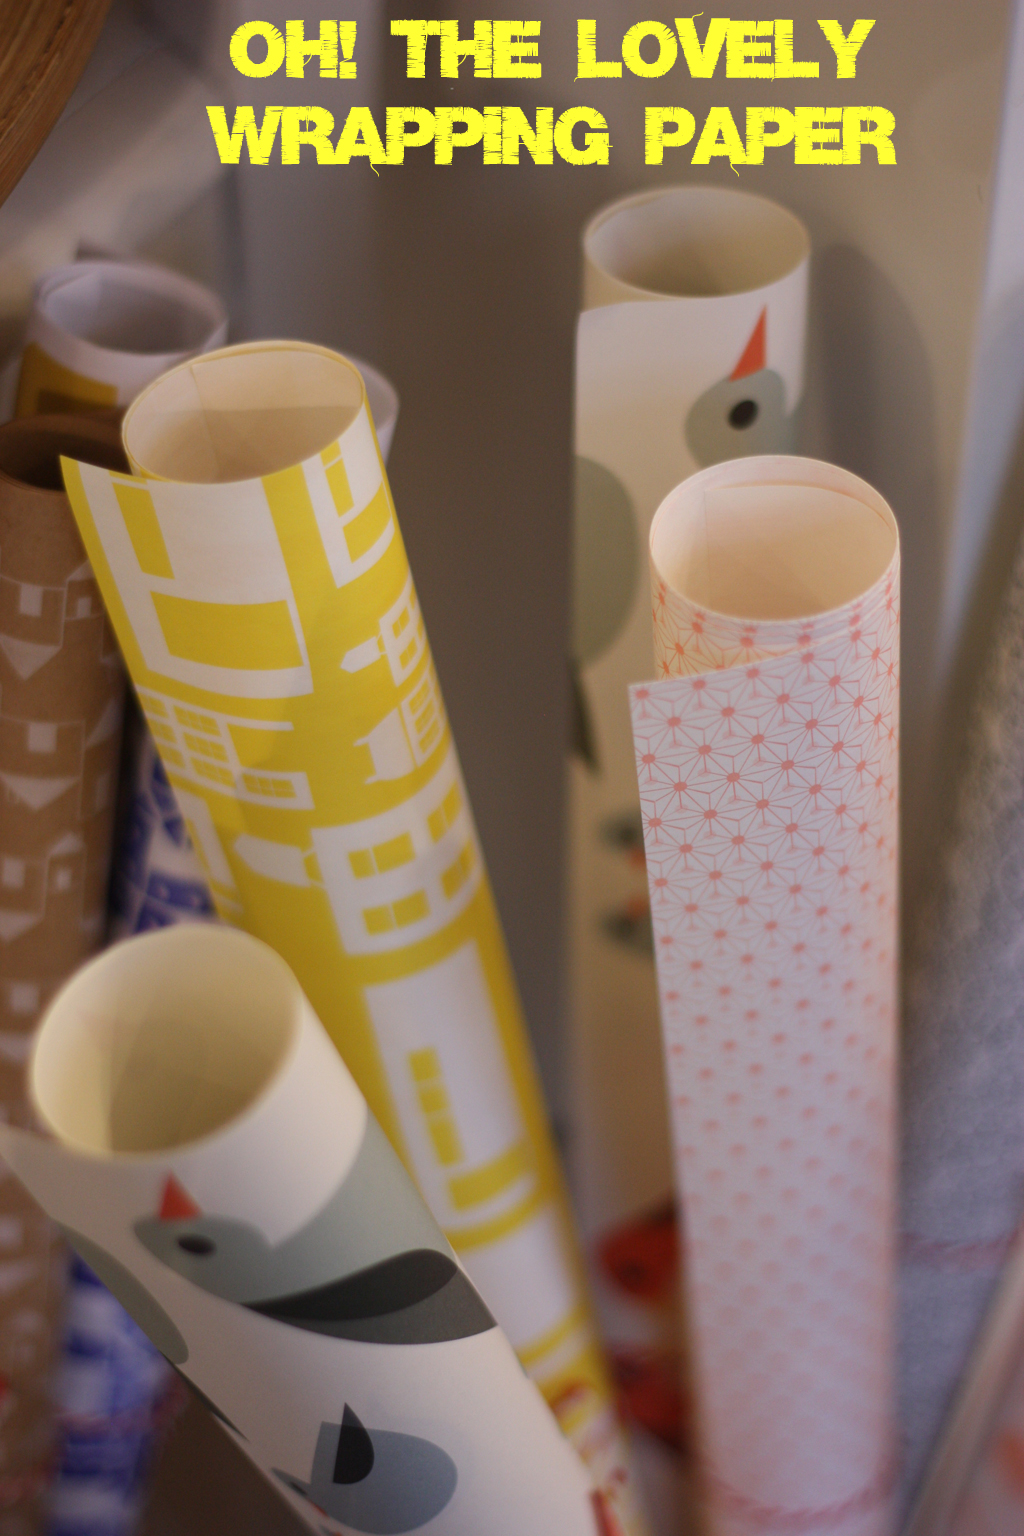 Lovely wrapping paper by madame love